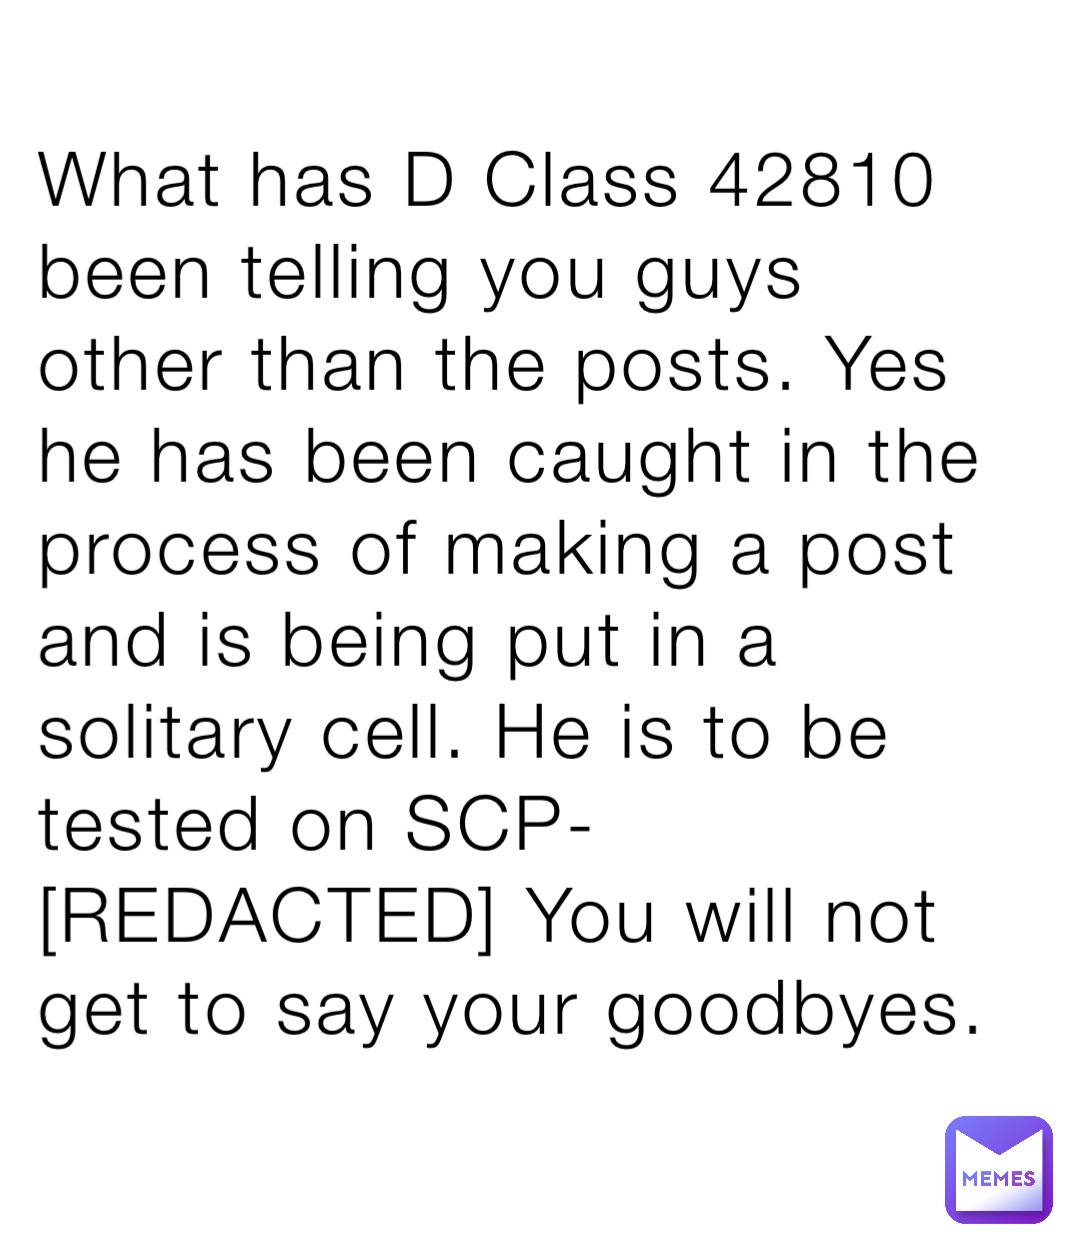 What has D Class 42810 been telling you guys other than the posts. Yes he has been caught in the process of making a post and is being put in a solitary cell. He is to be tested on SCP- [REDACTED] You will not get to say your goodbyes.